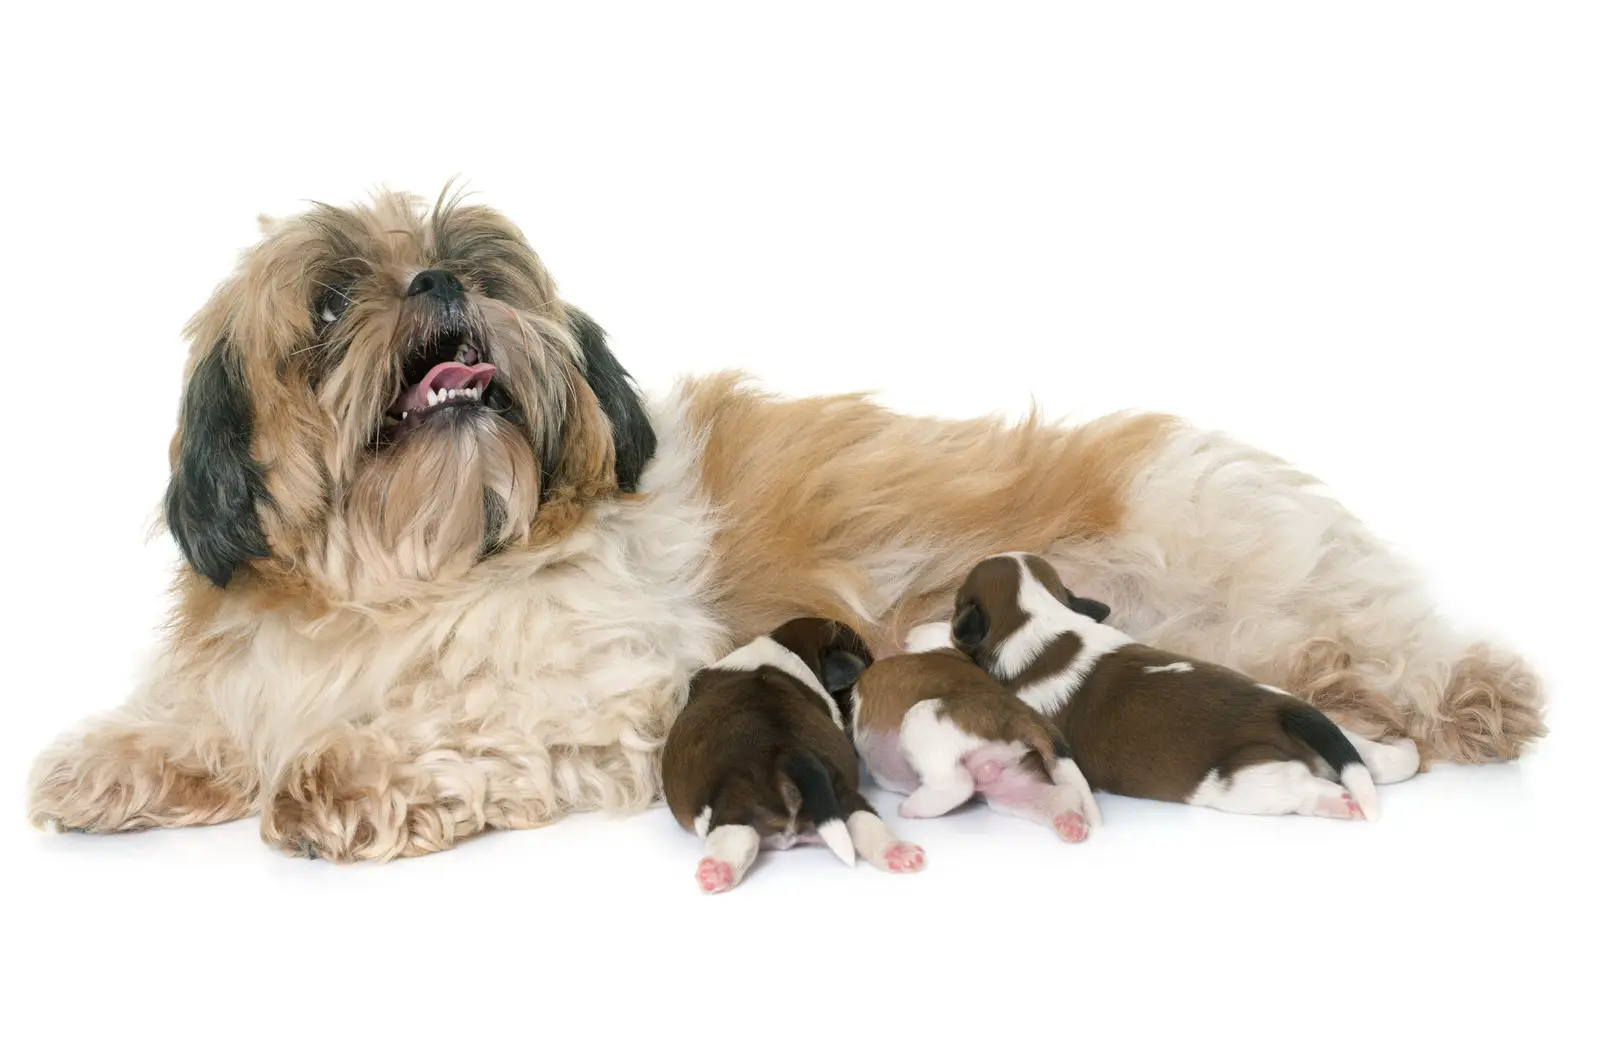 shih tzu dog and puppies in front of white background